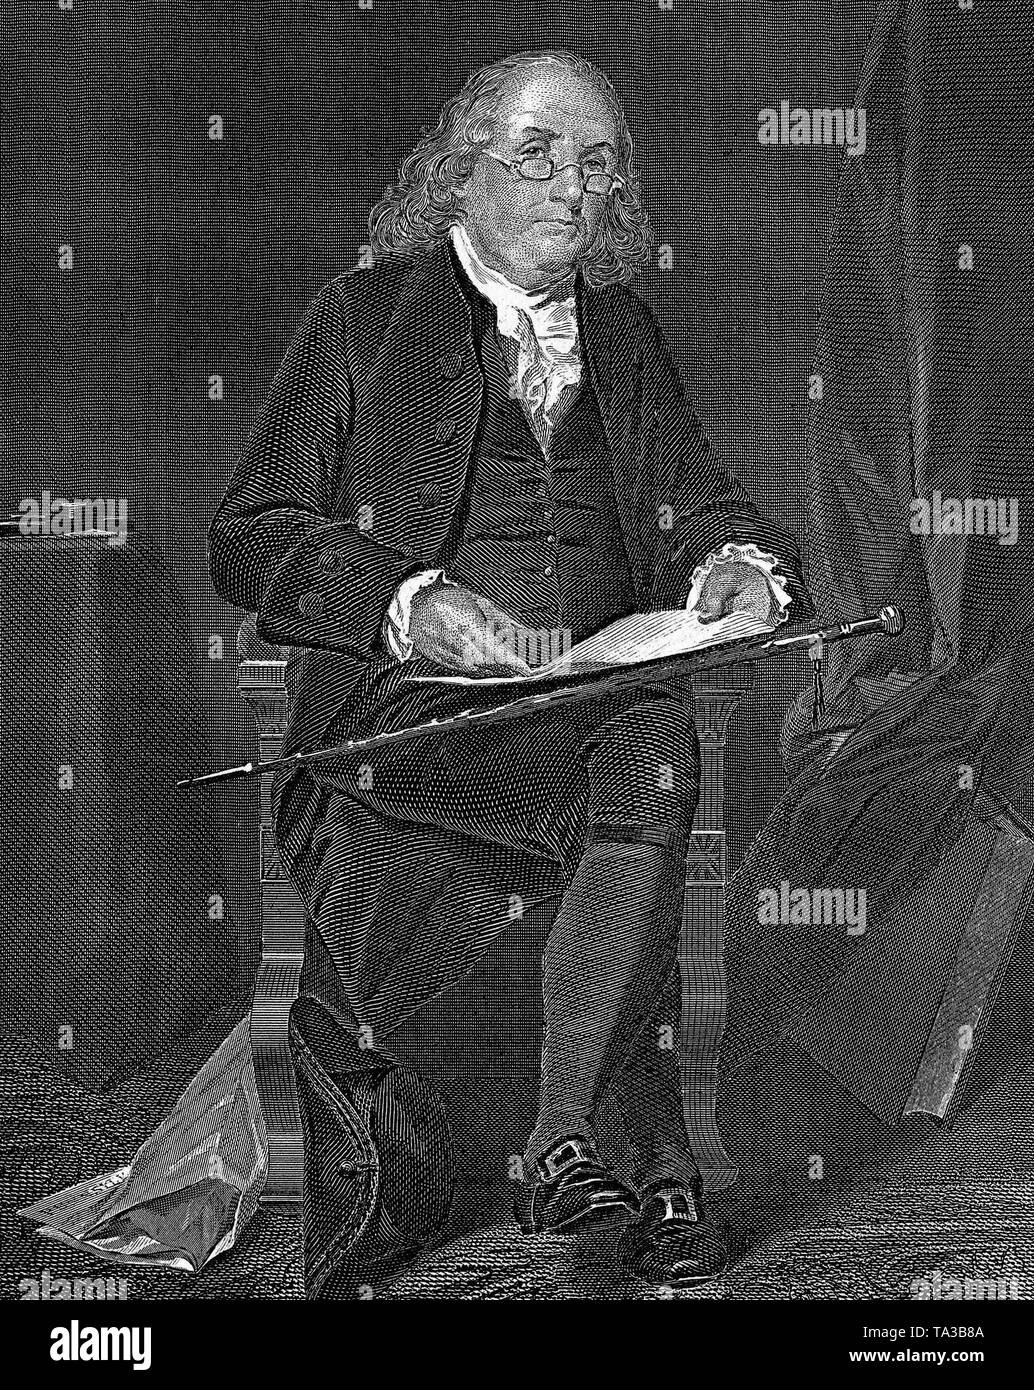 Benjamin Franklin (1706-1790), an American scientist, statesman and writer, when reading. Franklin is best known for his invention of the lightning rod. Stock Photo